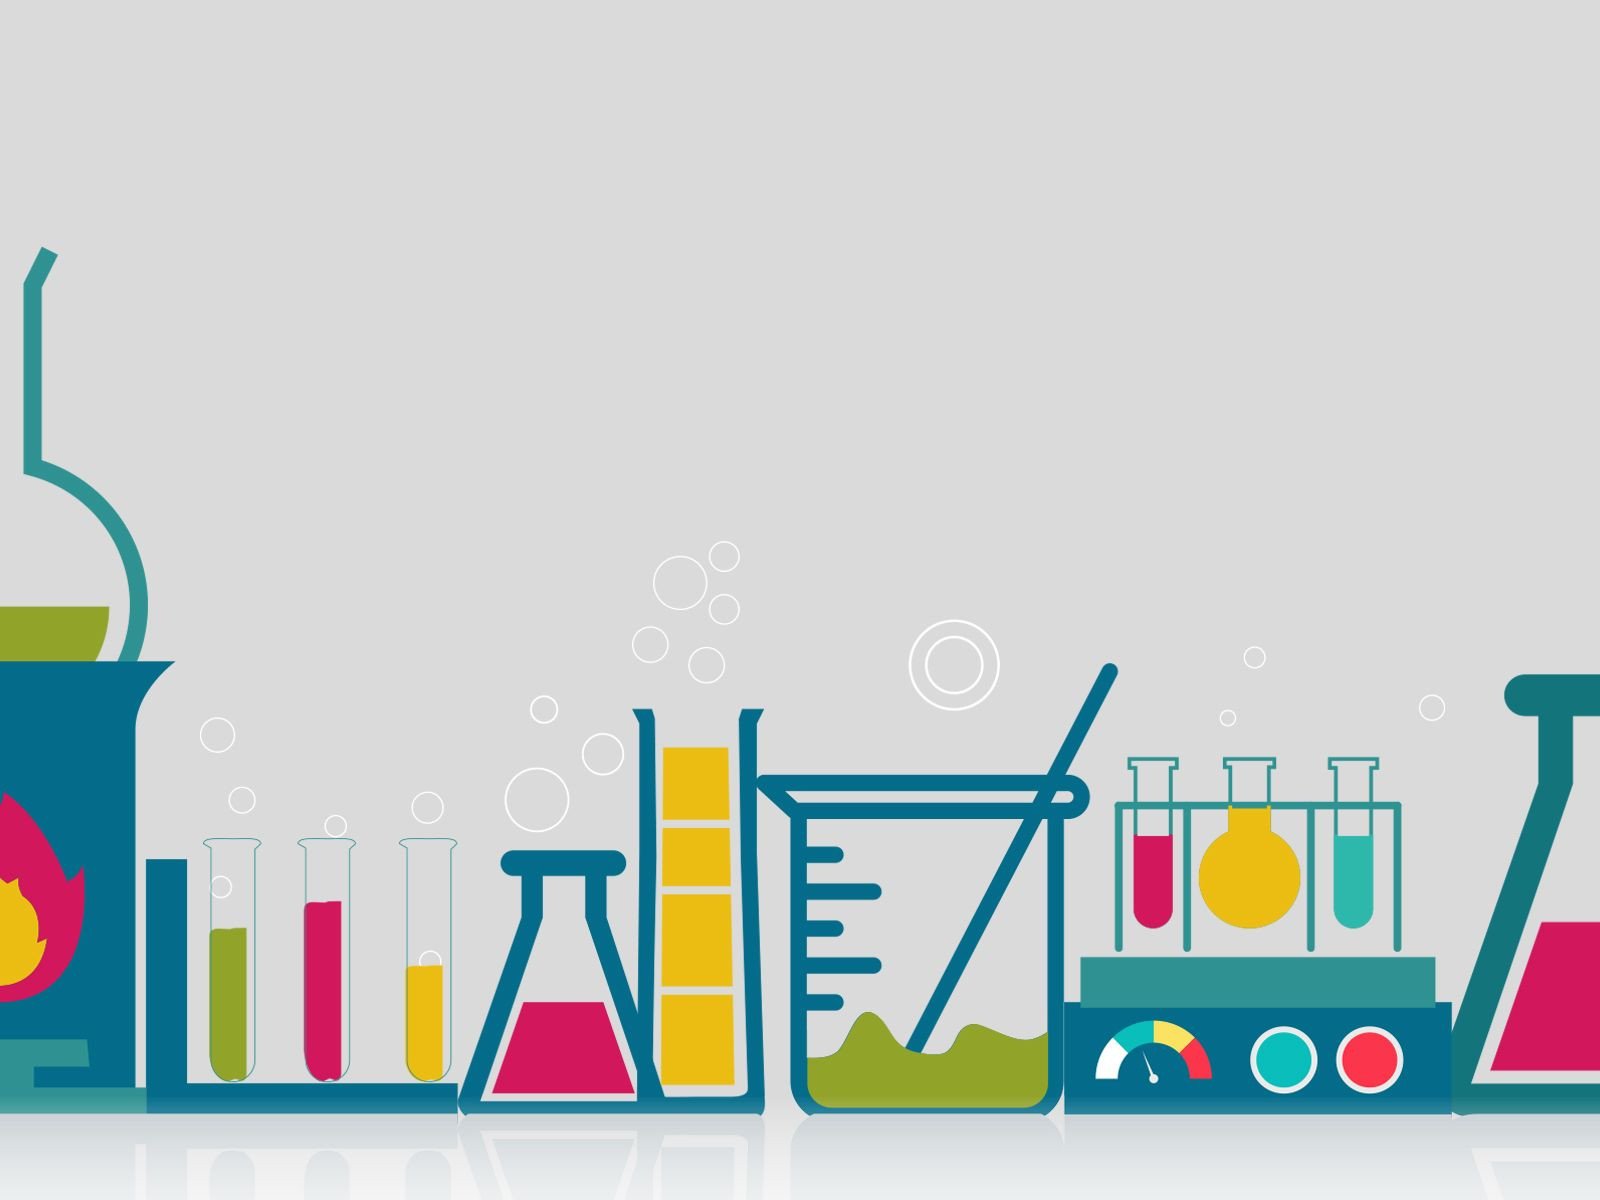 This Chemistry powerpoint background is a simple design